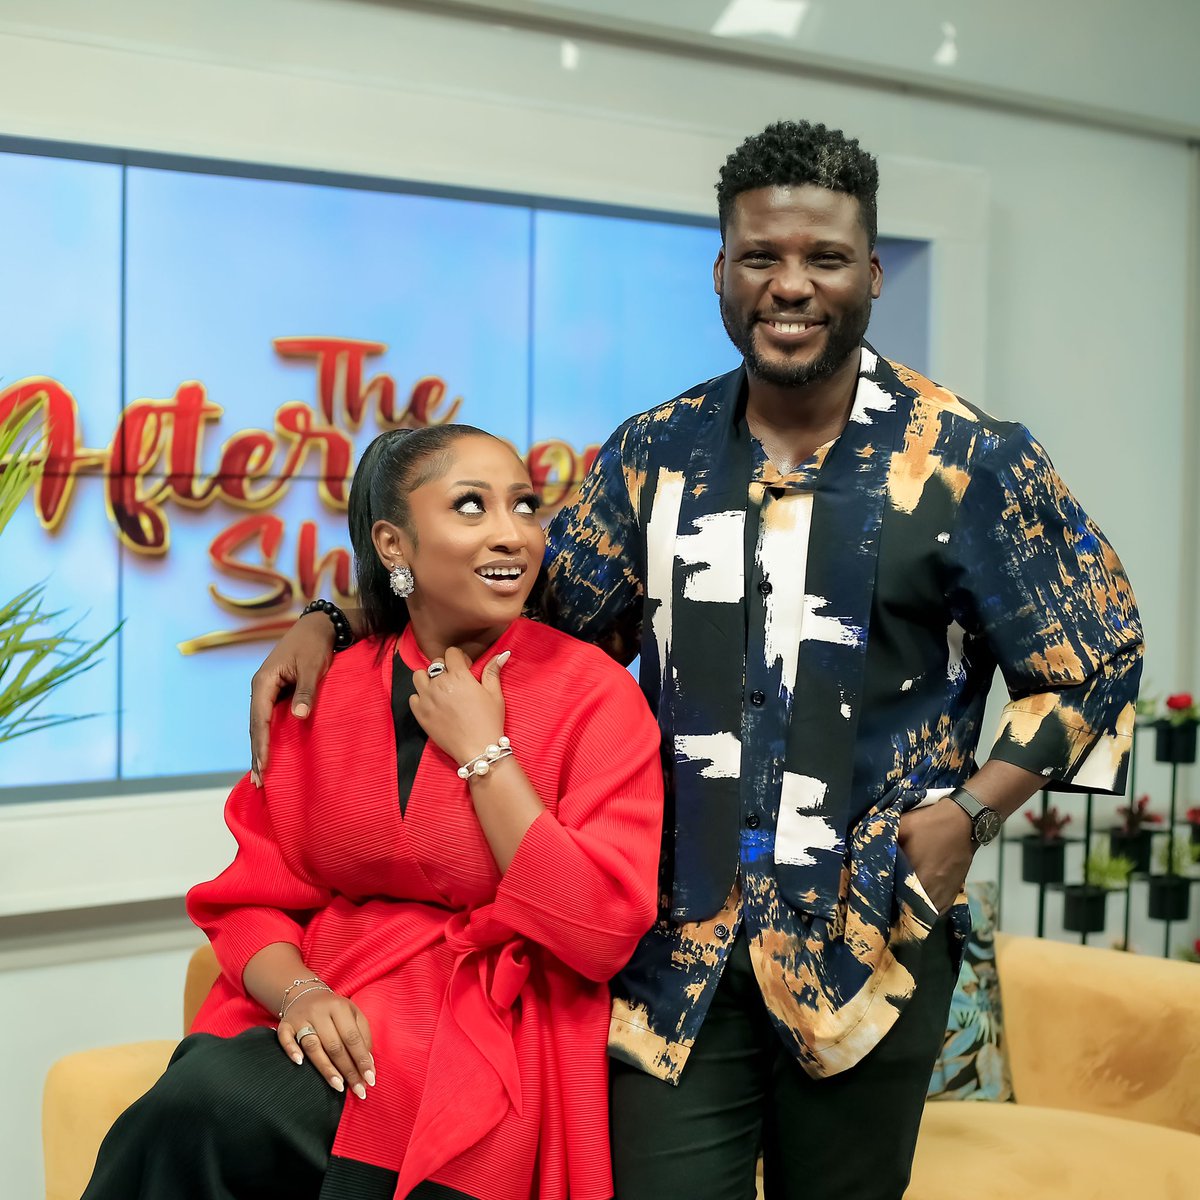 Catch #TheAfternoonShow at 1PM with Anita and Godwin Bringing the laughs and the looks every time! 😀